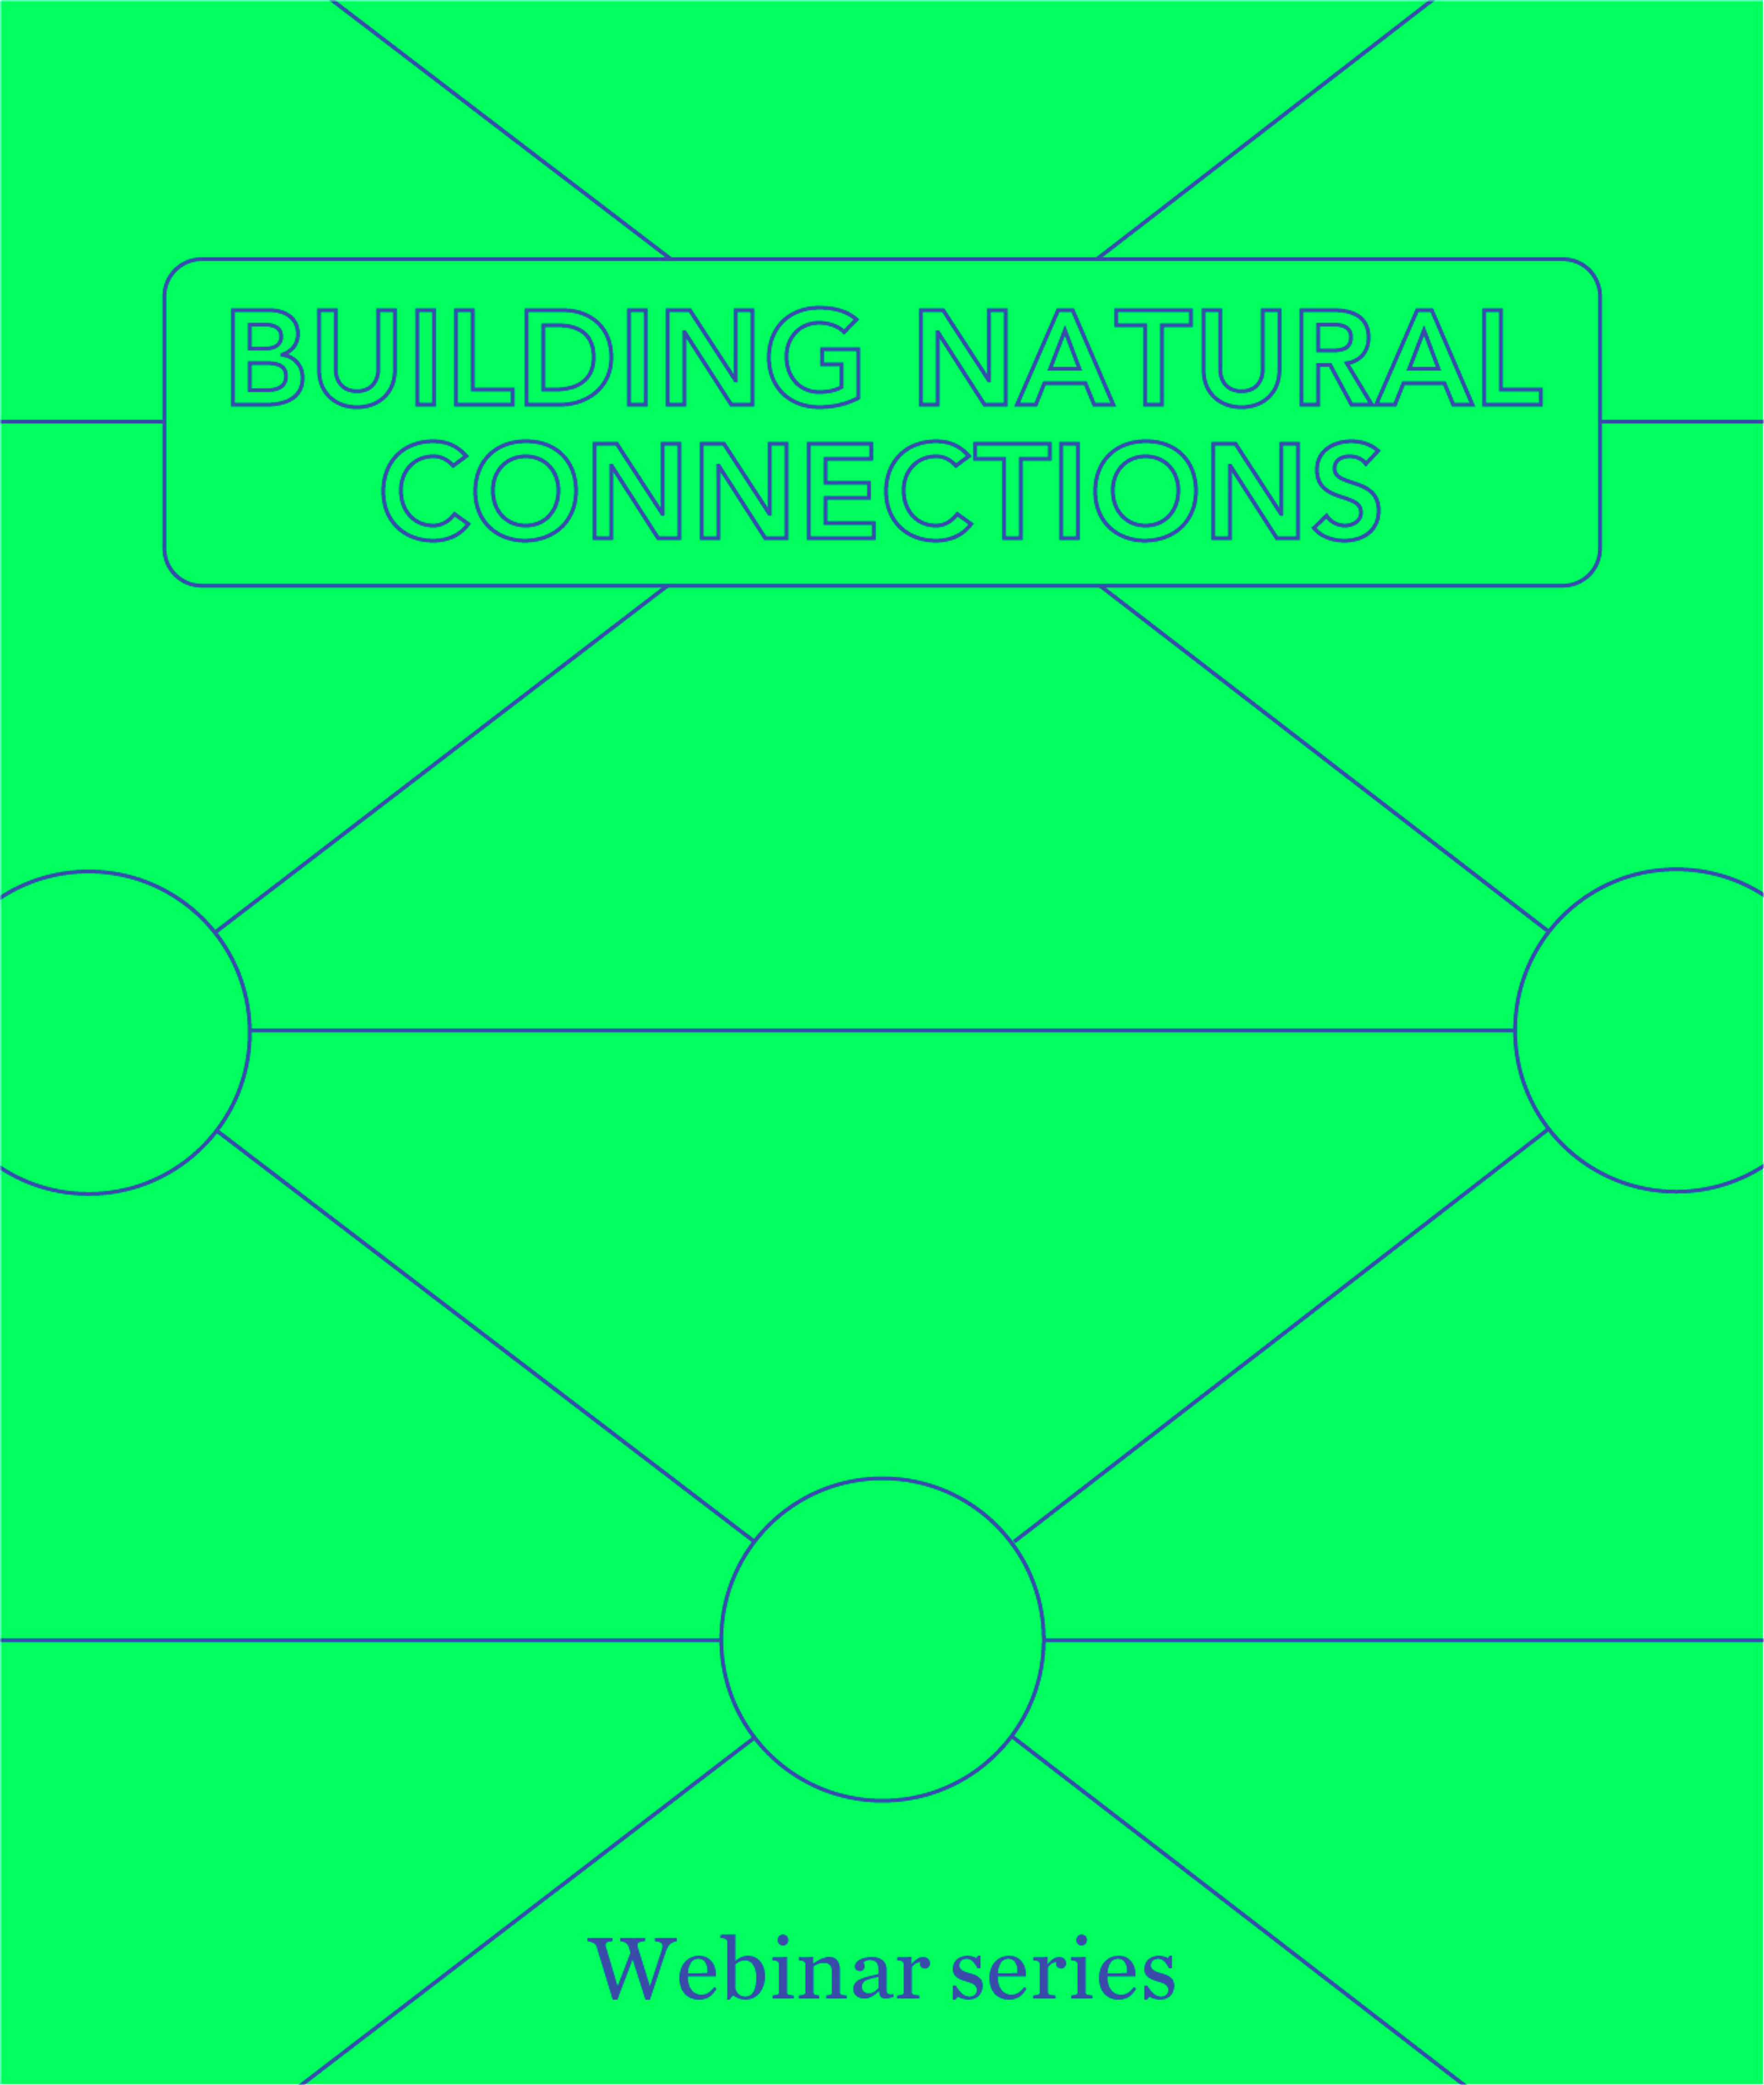 Webinar series: Building Natural Connections